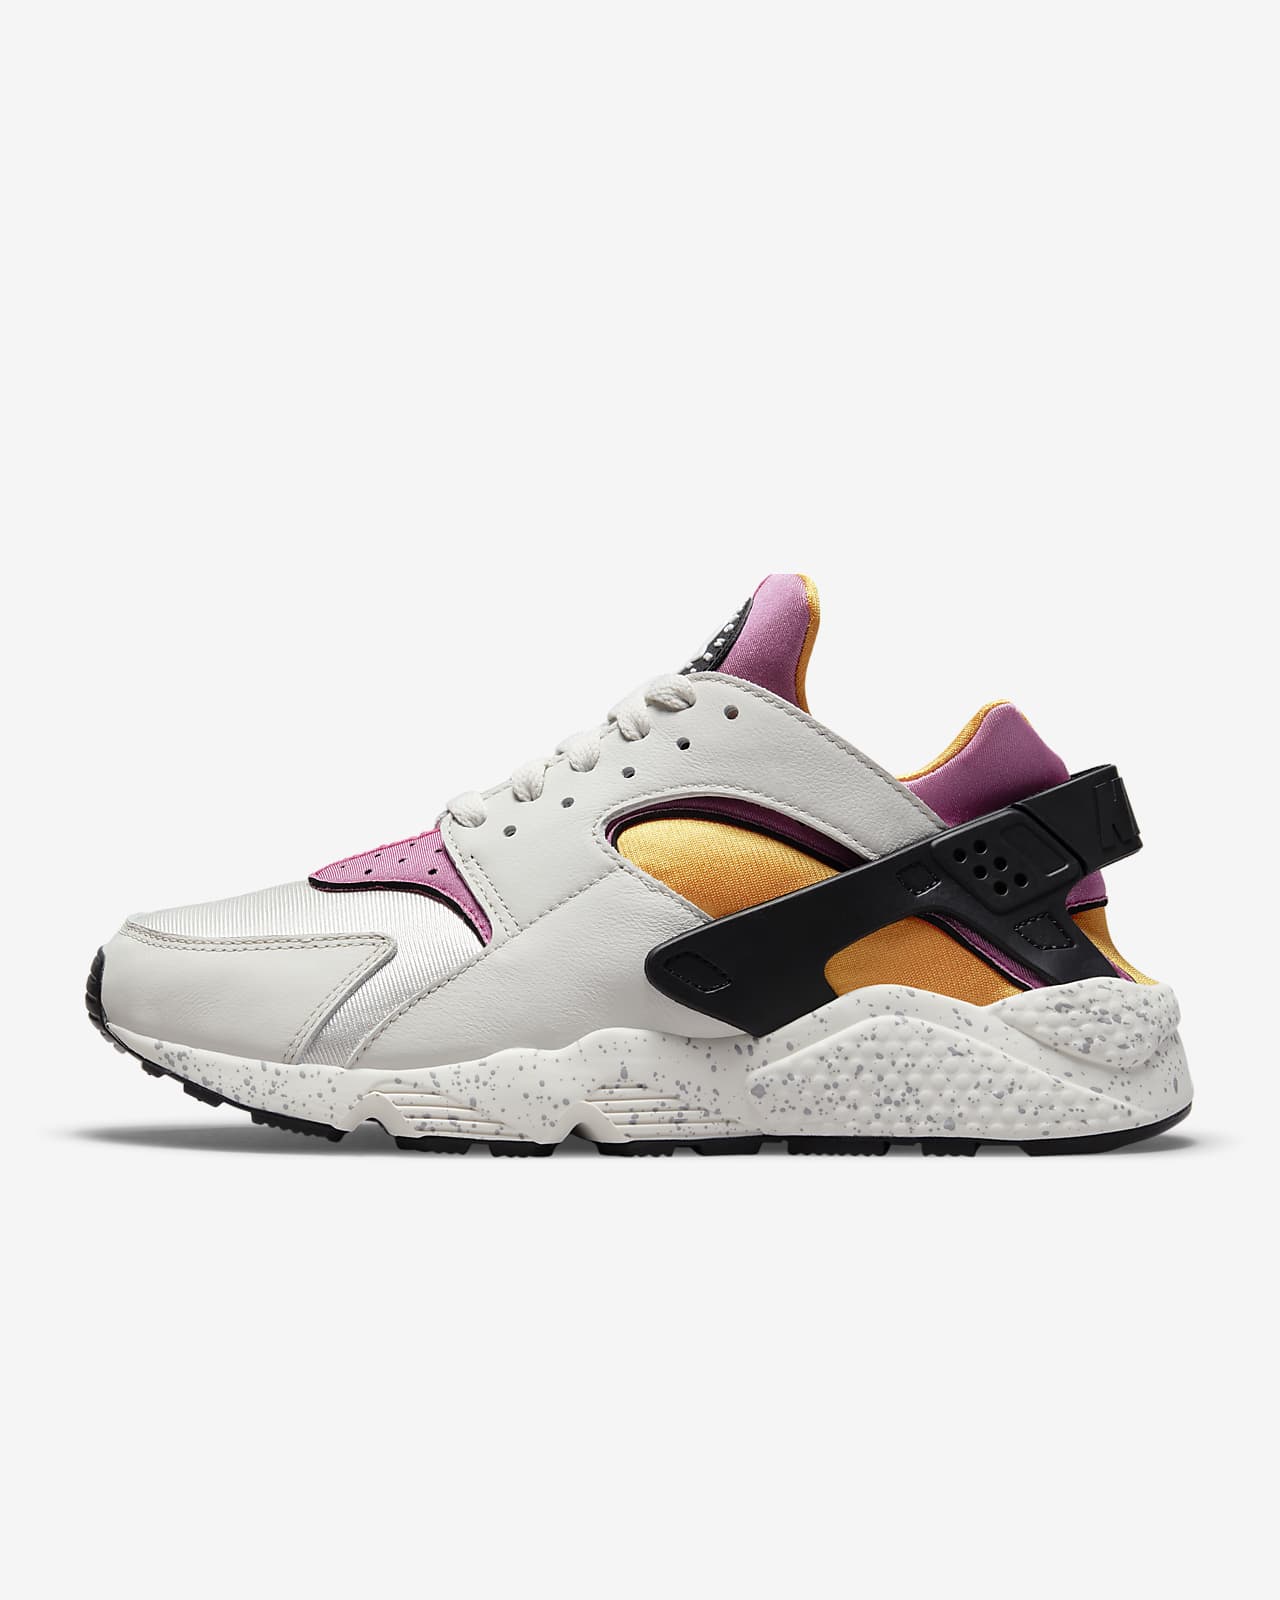 Detector leftovers mechanical Chaussure Nike Air Huarache pour Homme. Nike FR